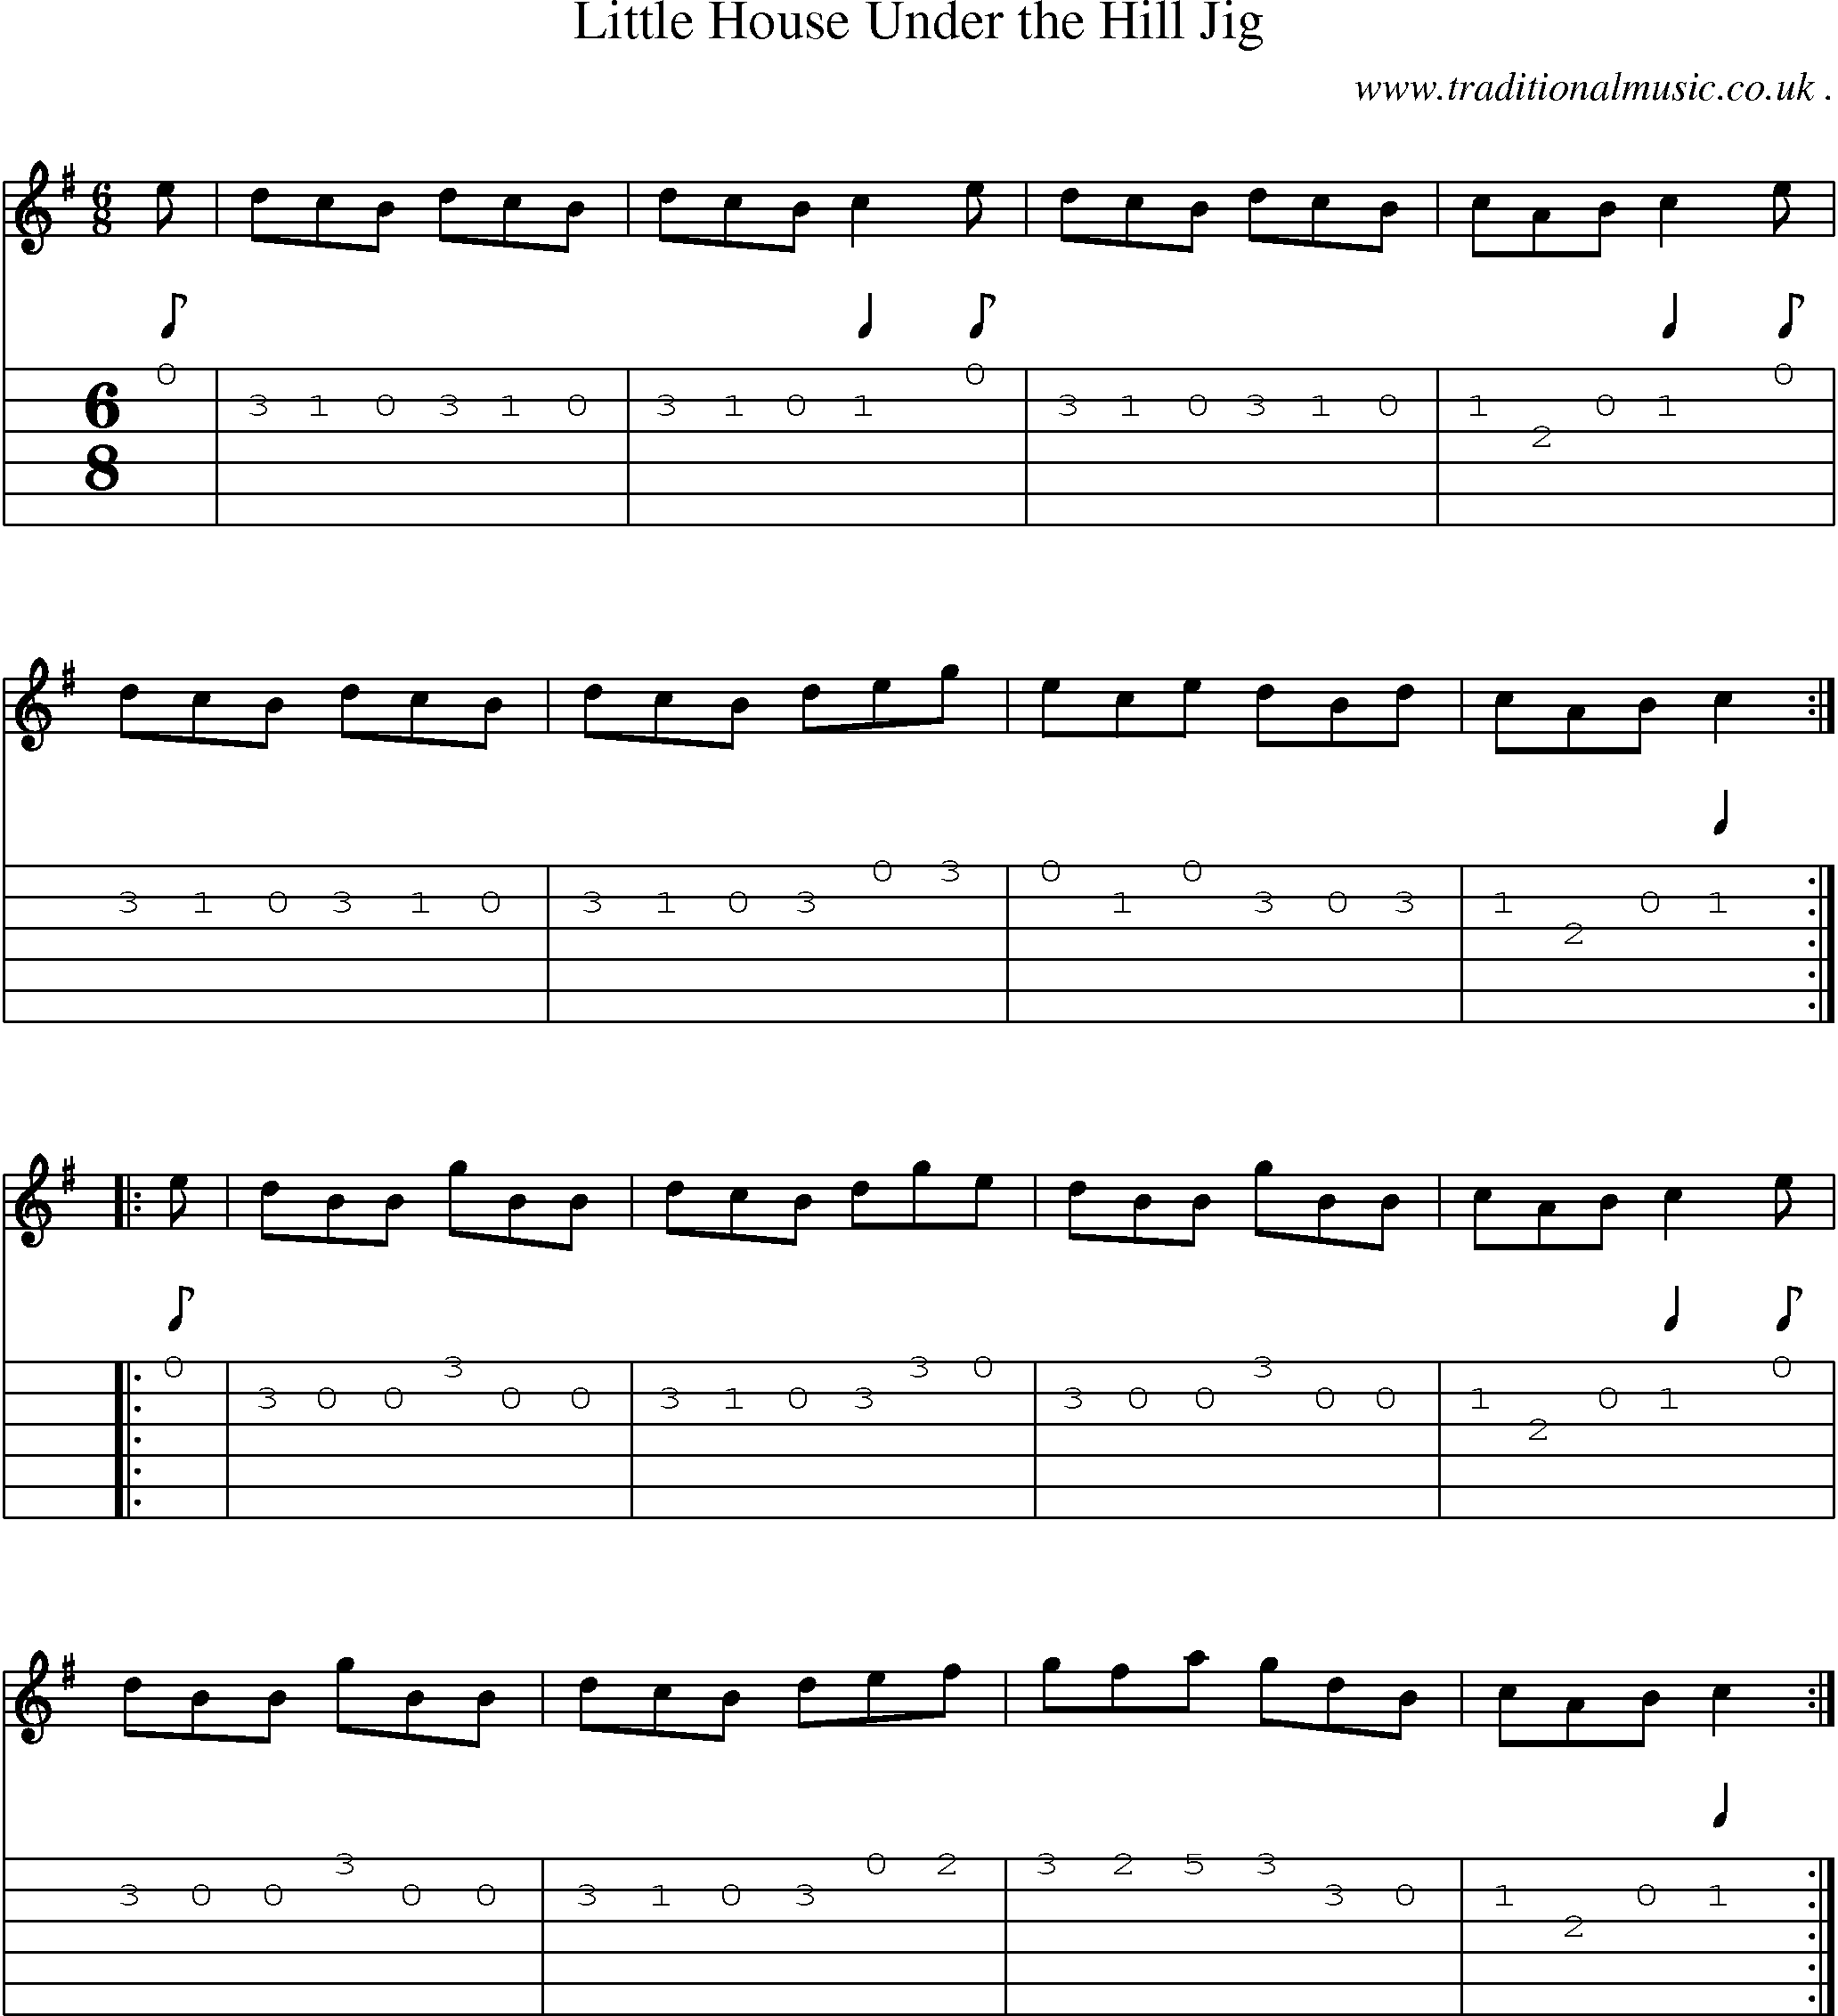 Sheet-Music and Guitar Tabs for Little House Under The Hill Jig